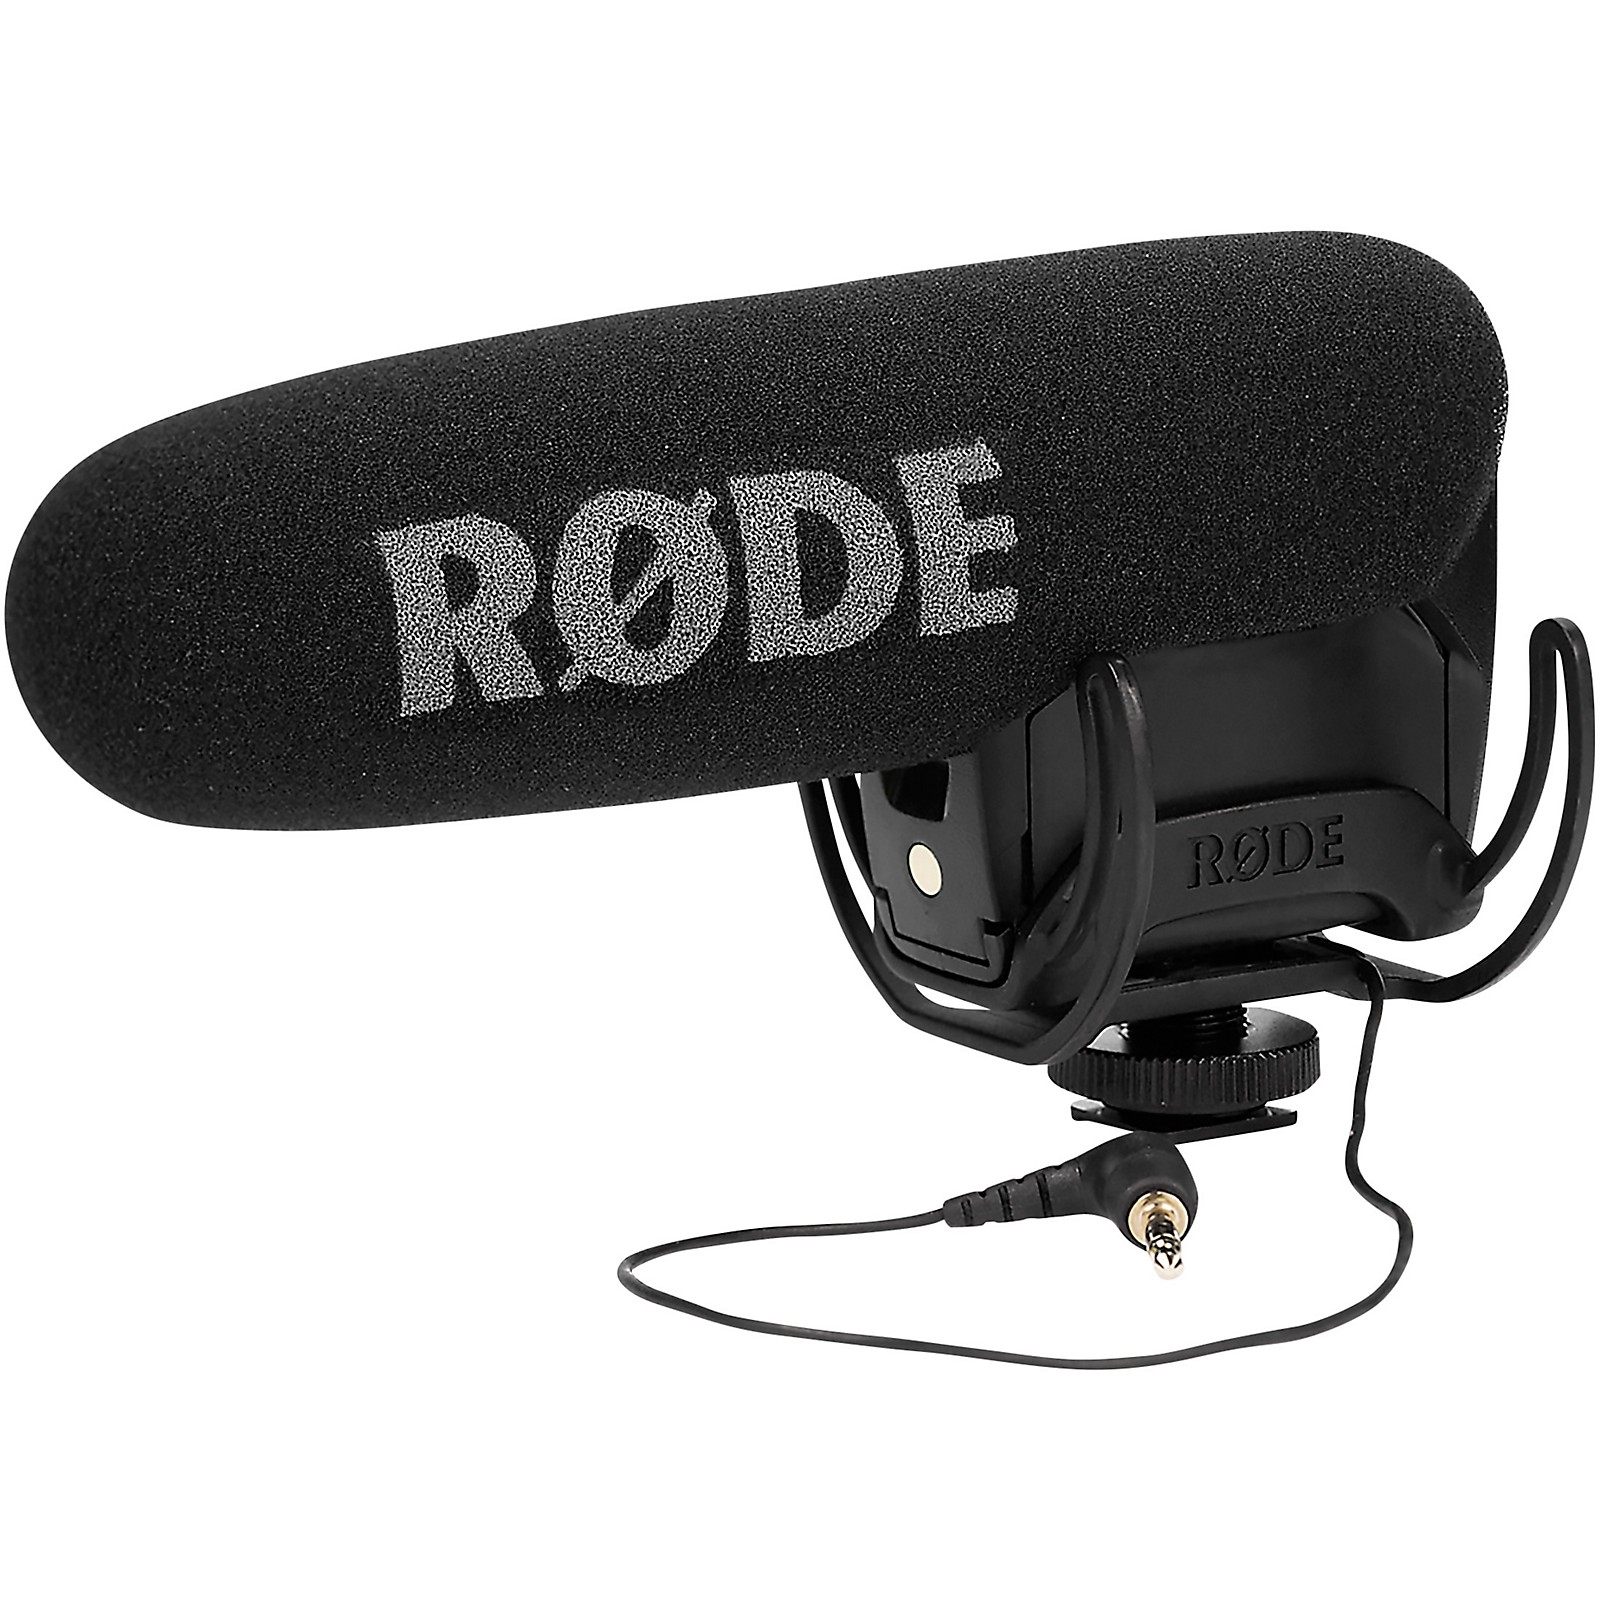 Rode Videomic Pro R Plus with Boom Pole 10' Audio Cable and MA-100 Adapter 